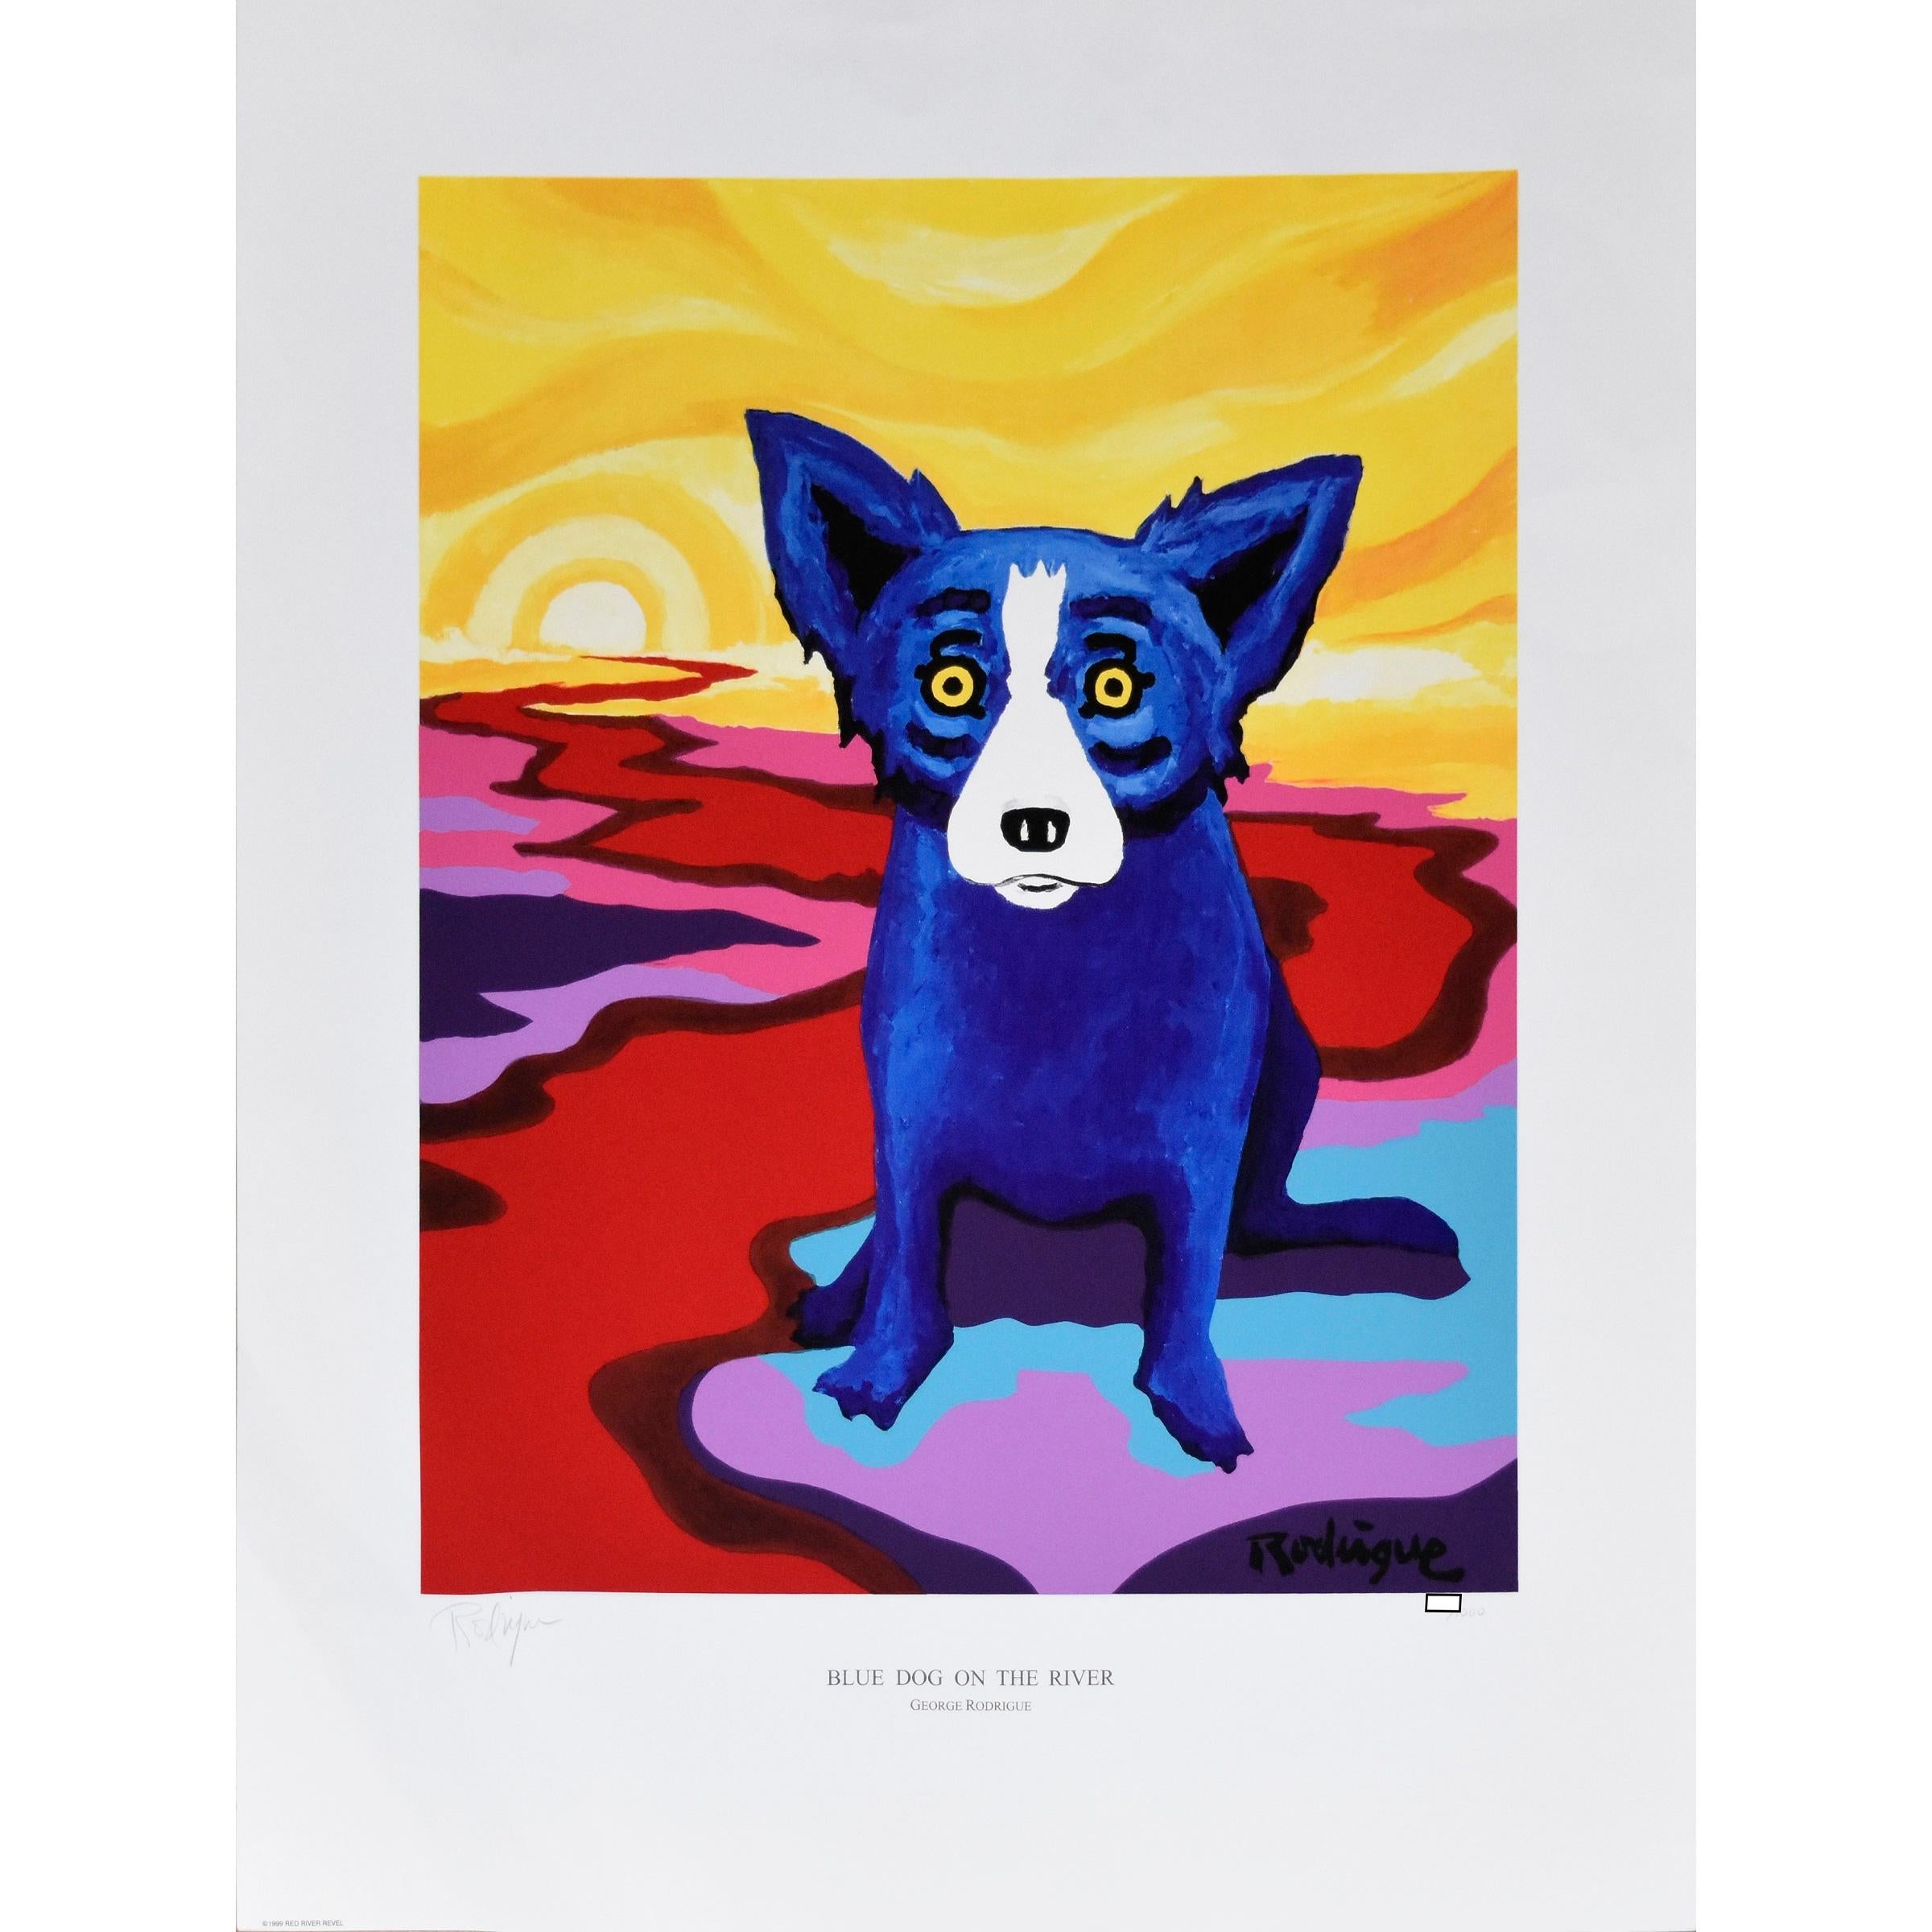 George Rodrigue Animal Print - Blue Dog on the River